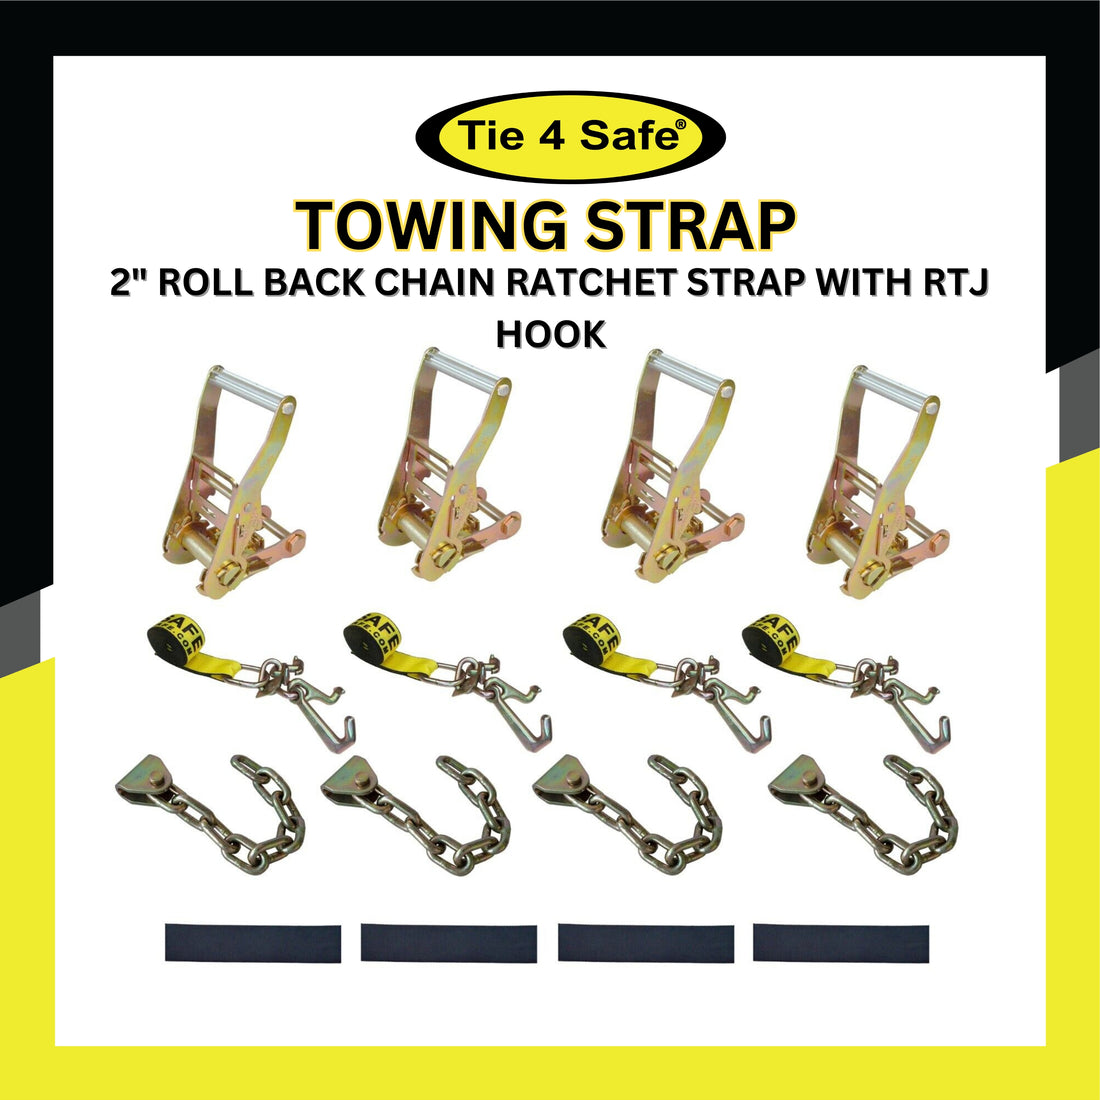 2" Roll Back Chain Ratchet Strap With RTJ Hook